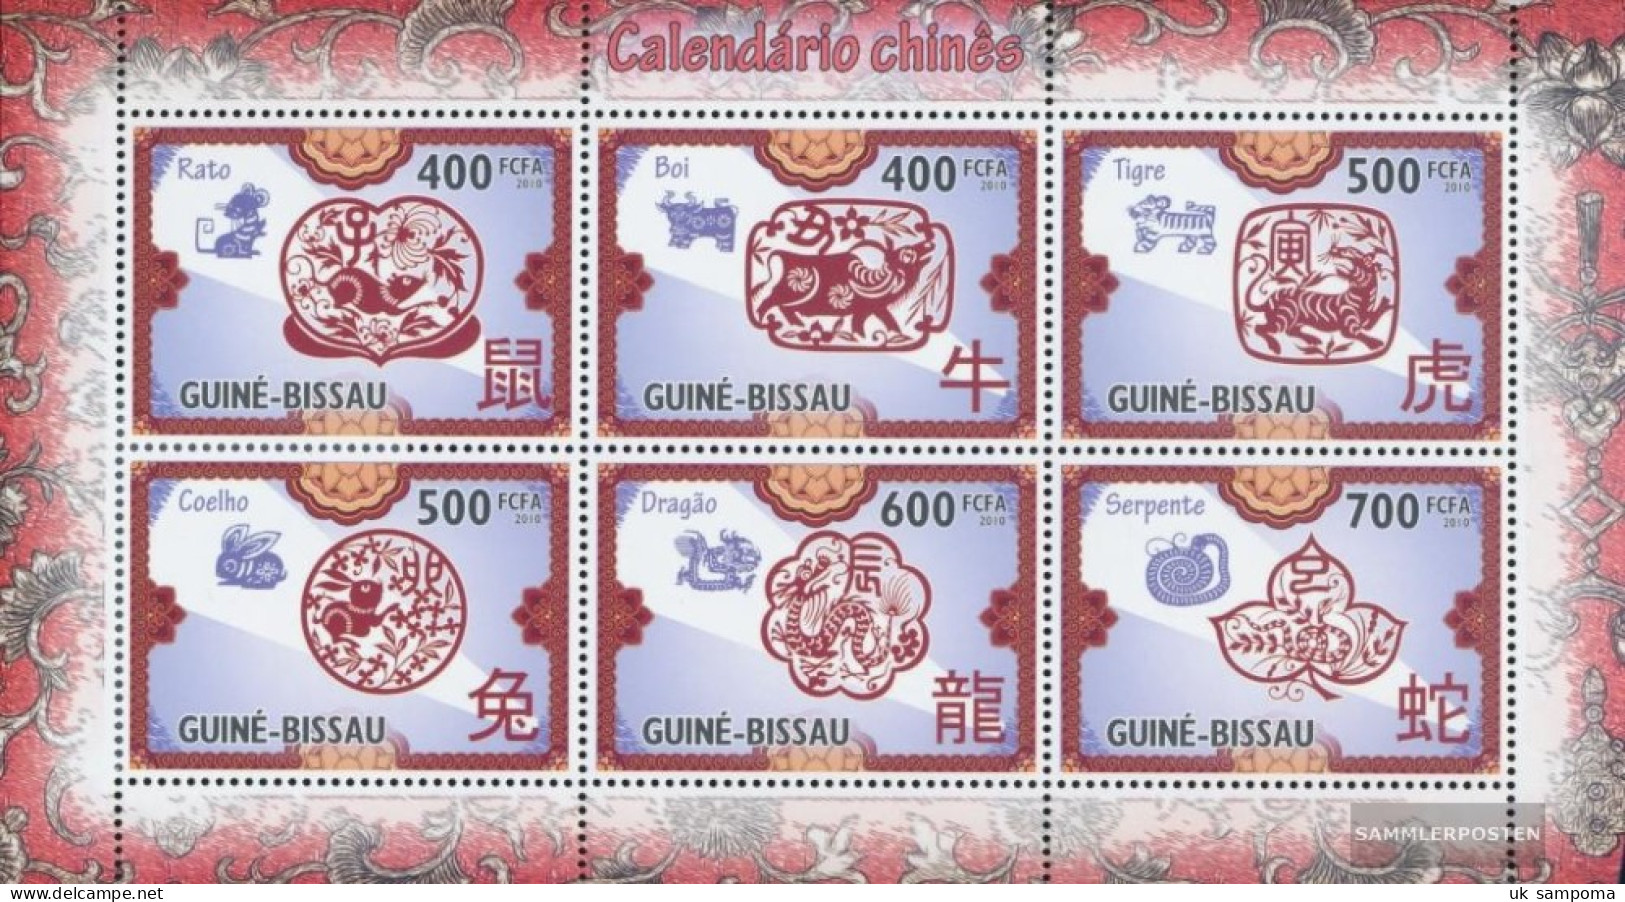 Guinea-Bissau 4785-4790A Sheetlet (complete. Issue) Unmounted Mint / Never Hinged 2010 Chinese Calendar - Guinée-Bissau